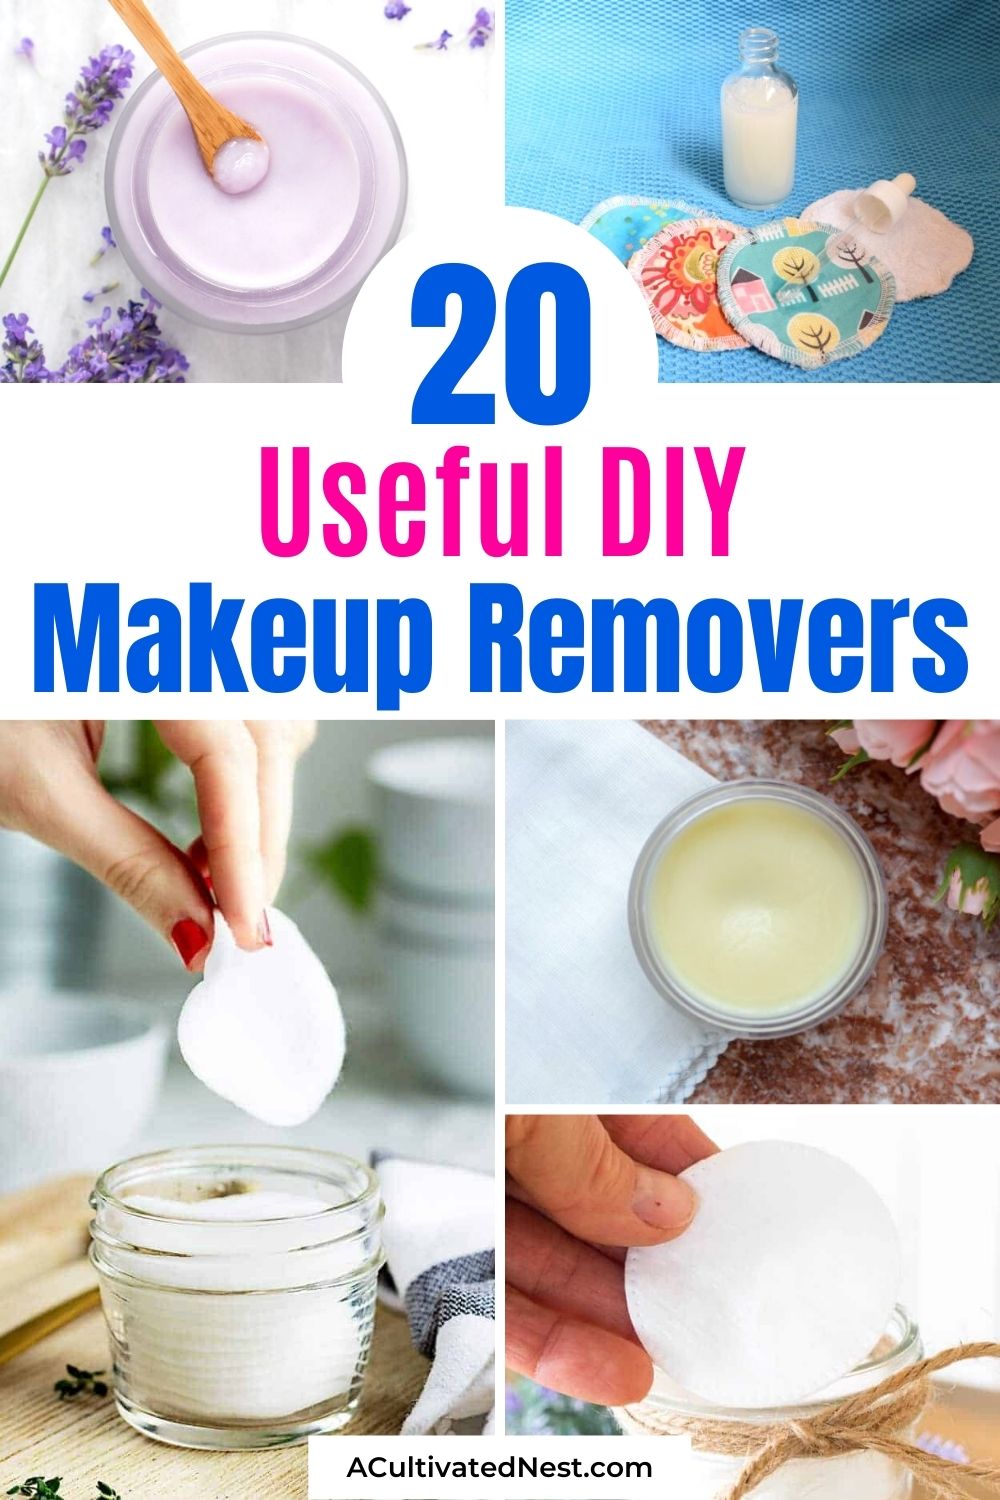 20 Useful DIY Makeup Removers- You can save money and remove your makeup naturally with these handy DIY makeup removers! They're so easy to make! | homemade makeup removers, all-natural makeup removers #makeupRemovers #homemadeBeautyProducts #diyMakeup #diyBeauty #ACultivatedNest